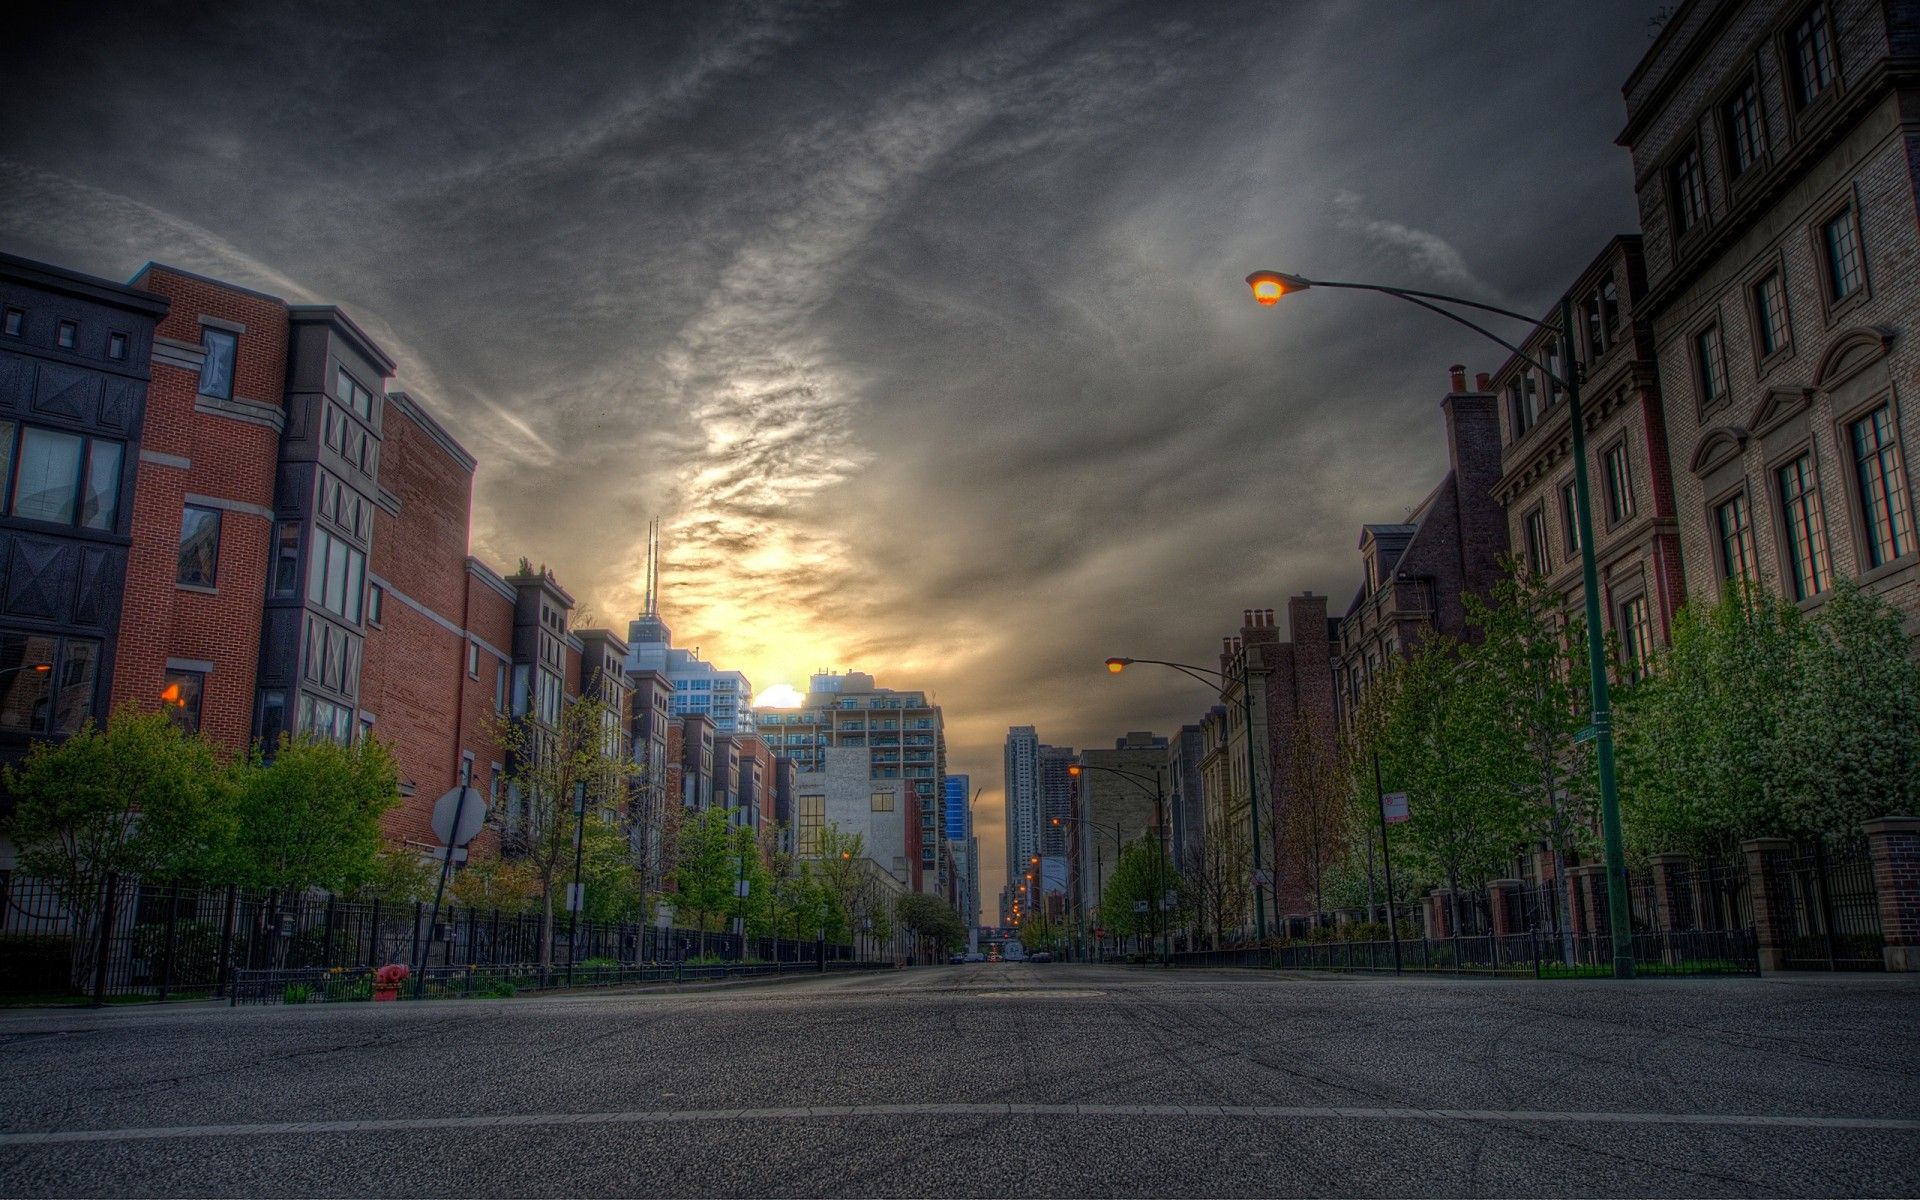 Cloudy city and empty street wallpaper download. Wallpaper